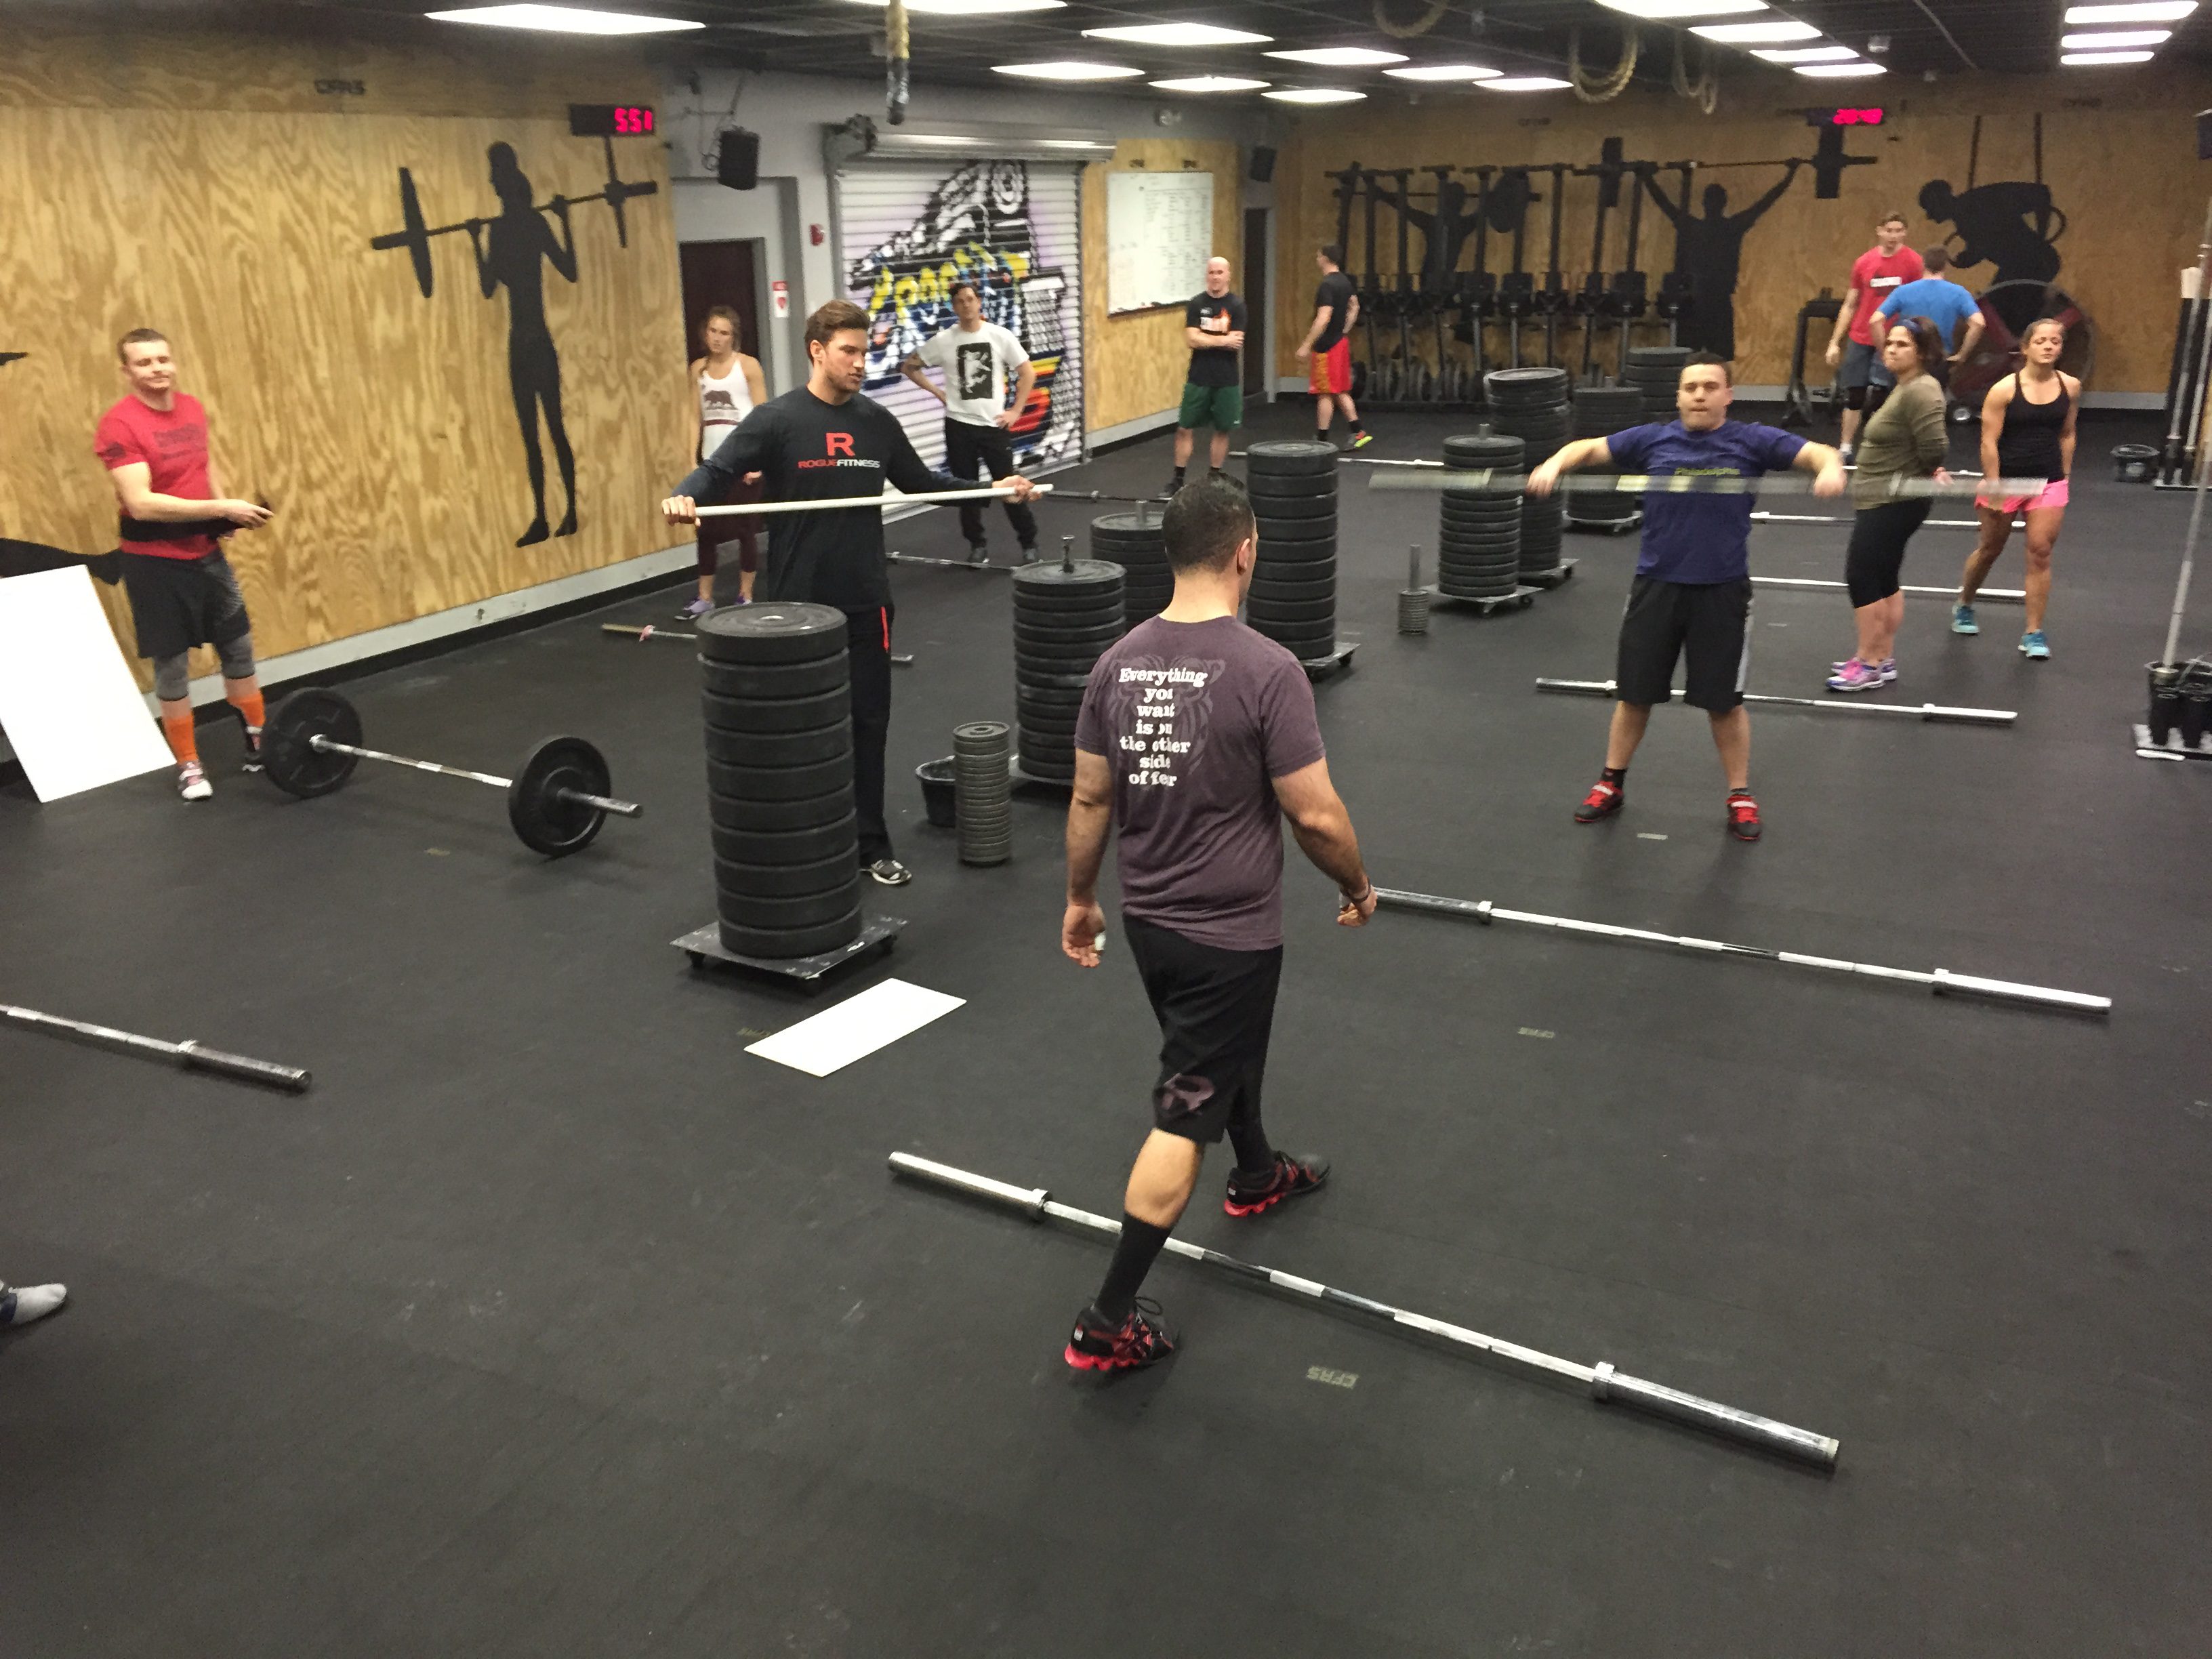 Wednesday 8.19.15 Barbell Club